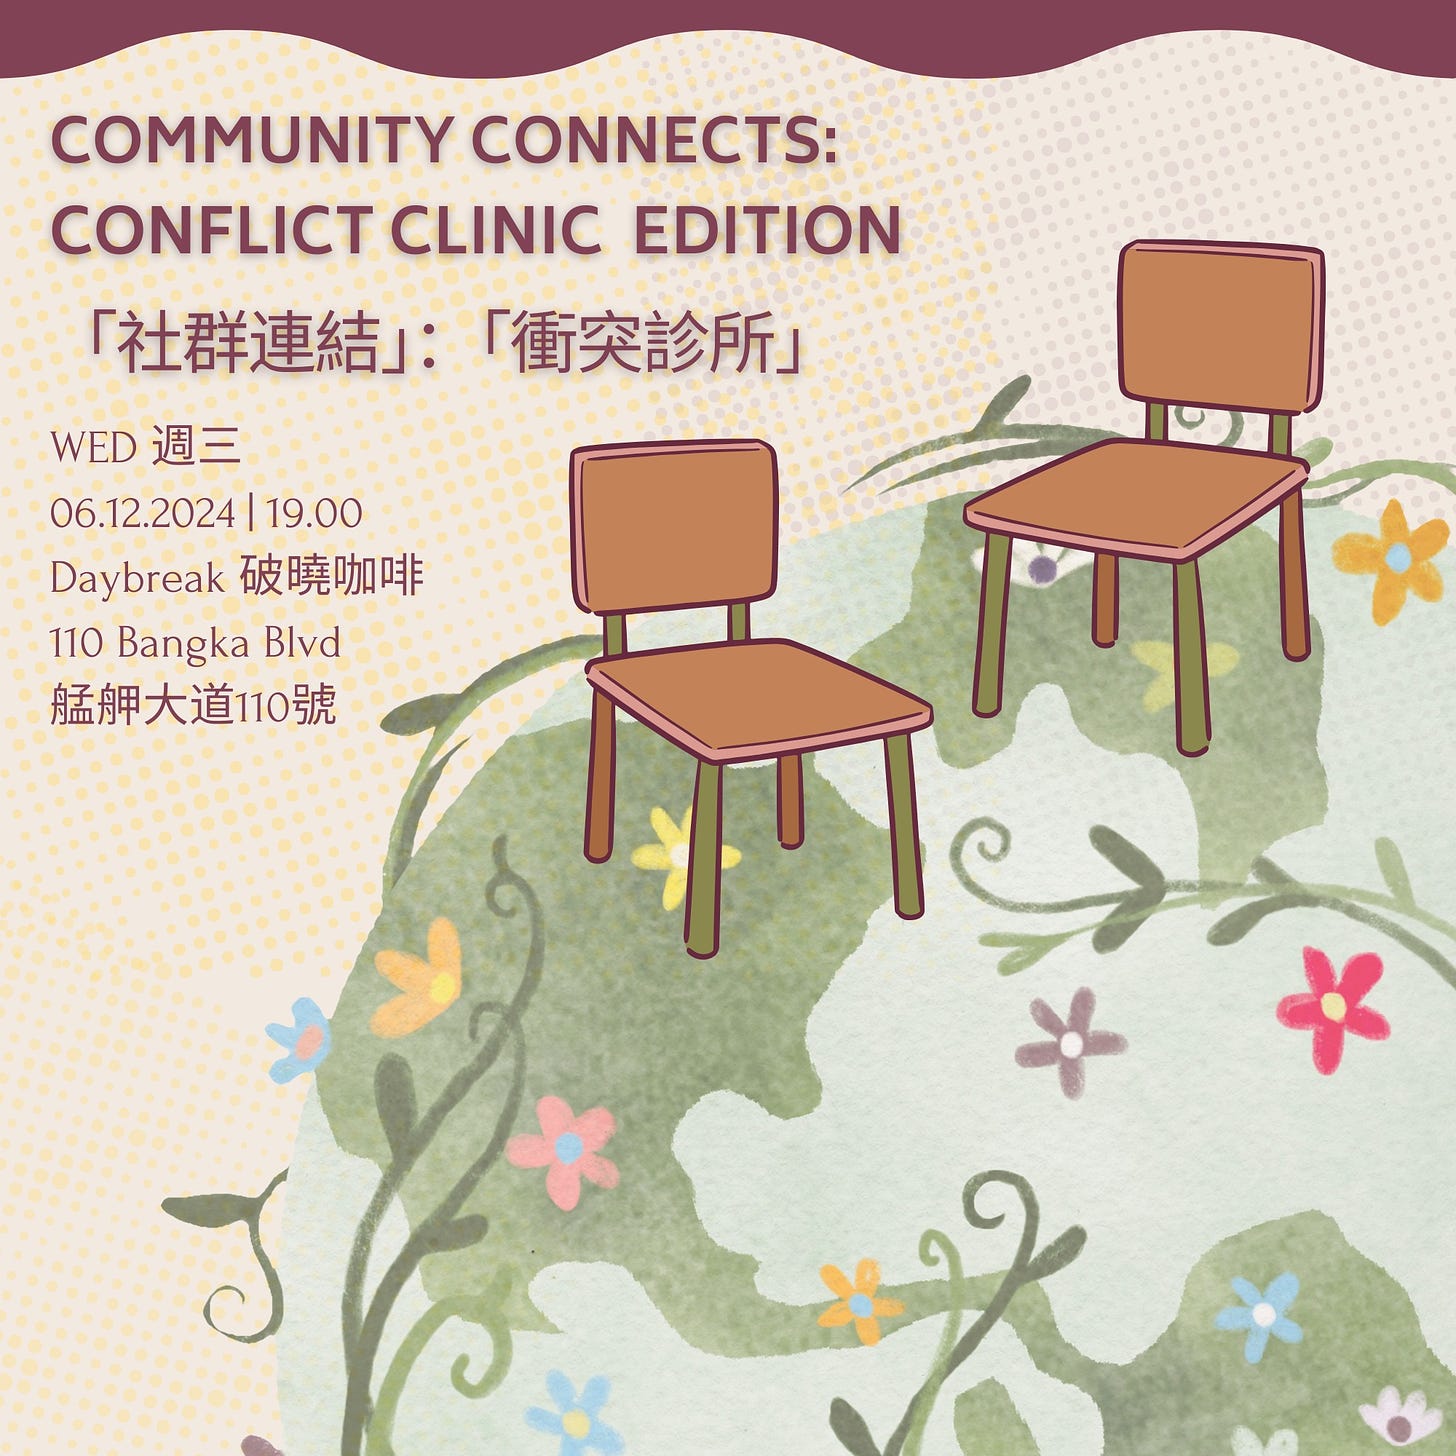 May be a doodle of text that says 'COMMUNITY CONNECTS: CONFLICT CONFLICTCLINIC CLINIC EDITION RMI ) 「社群連結」： 「衝突診所」 「社群連結：衝突診所」 WED WED週三 週三 06.12.2024|19.00 06.12.2024 19.00 Daybreak Daybreak破曉咖啡 破曉咖啡 110 Bangka 10BangkaBlvd Blvd 艦卿大道110號'